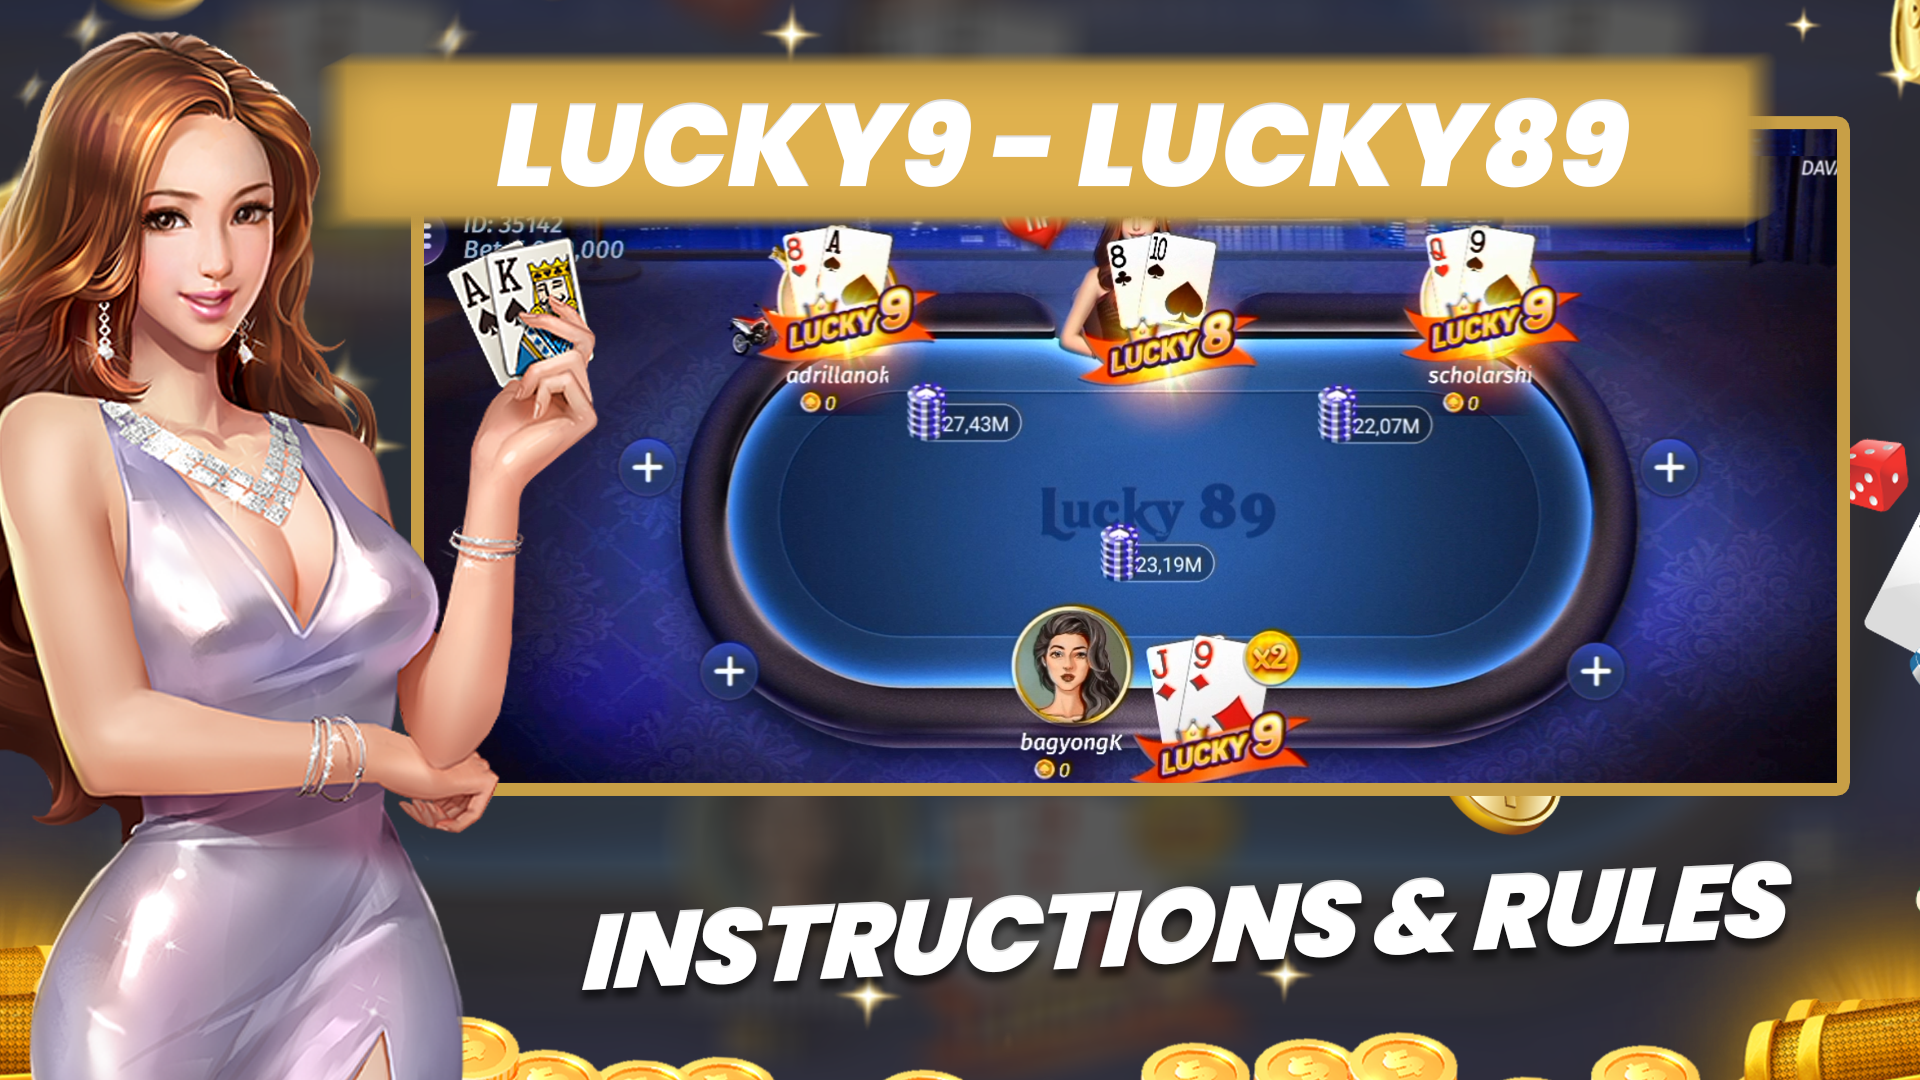 How to play Lucky 9? Lucky9 guide